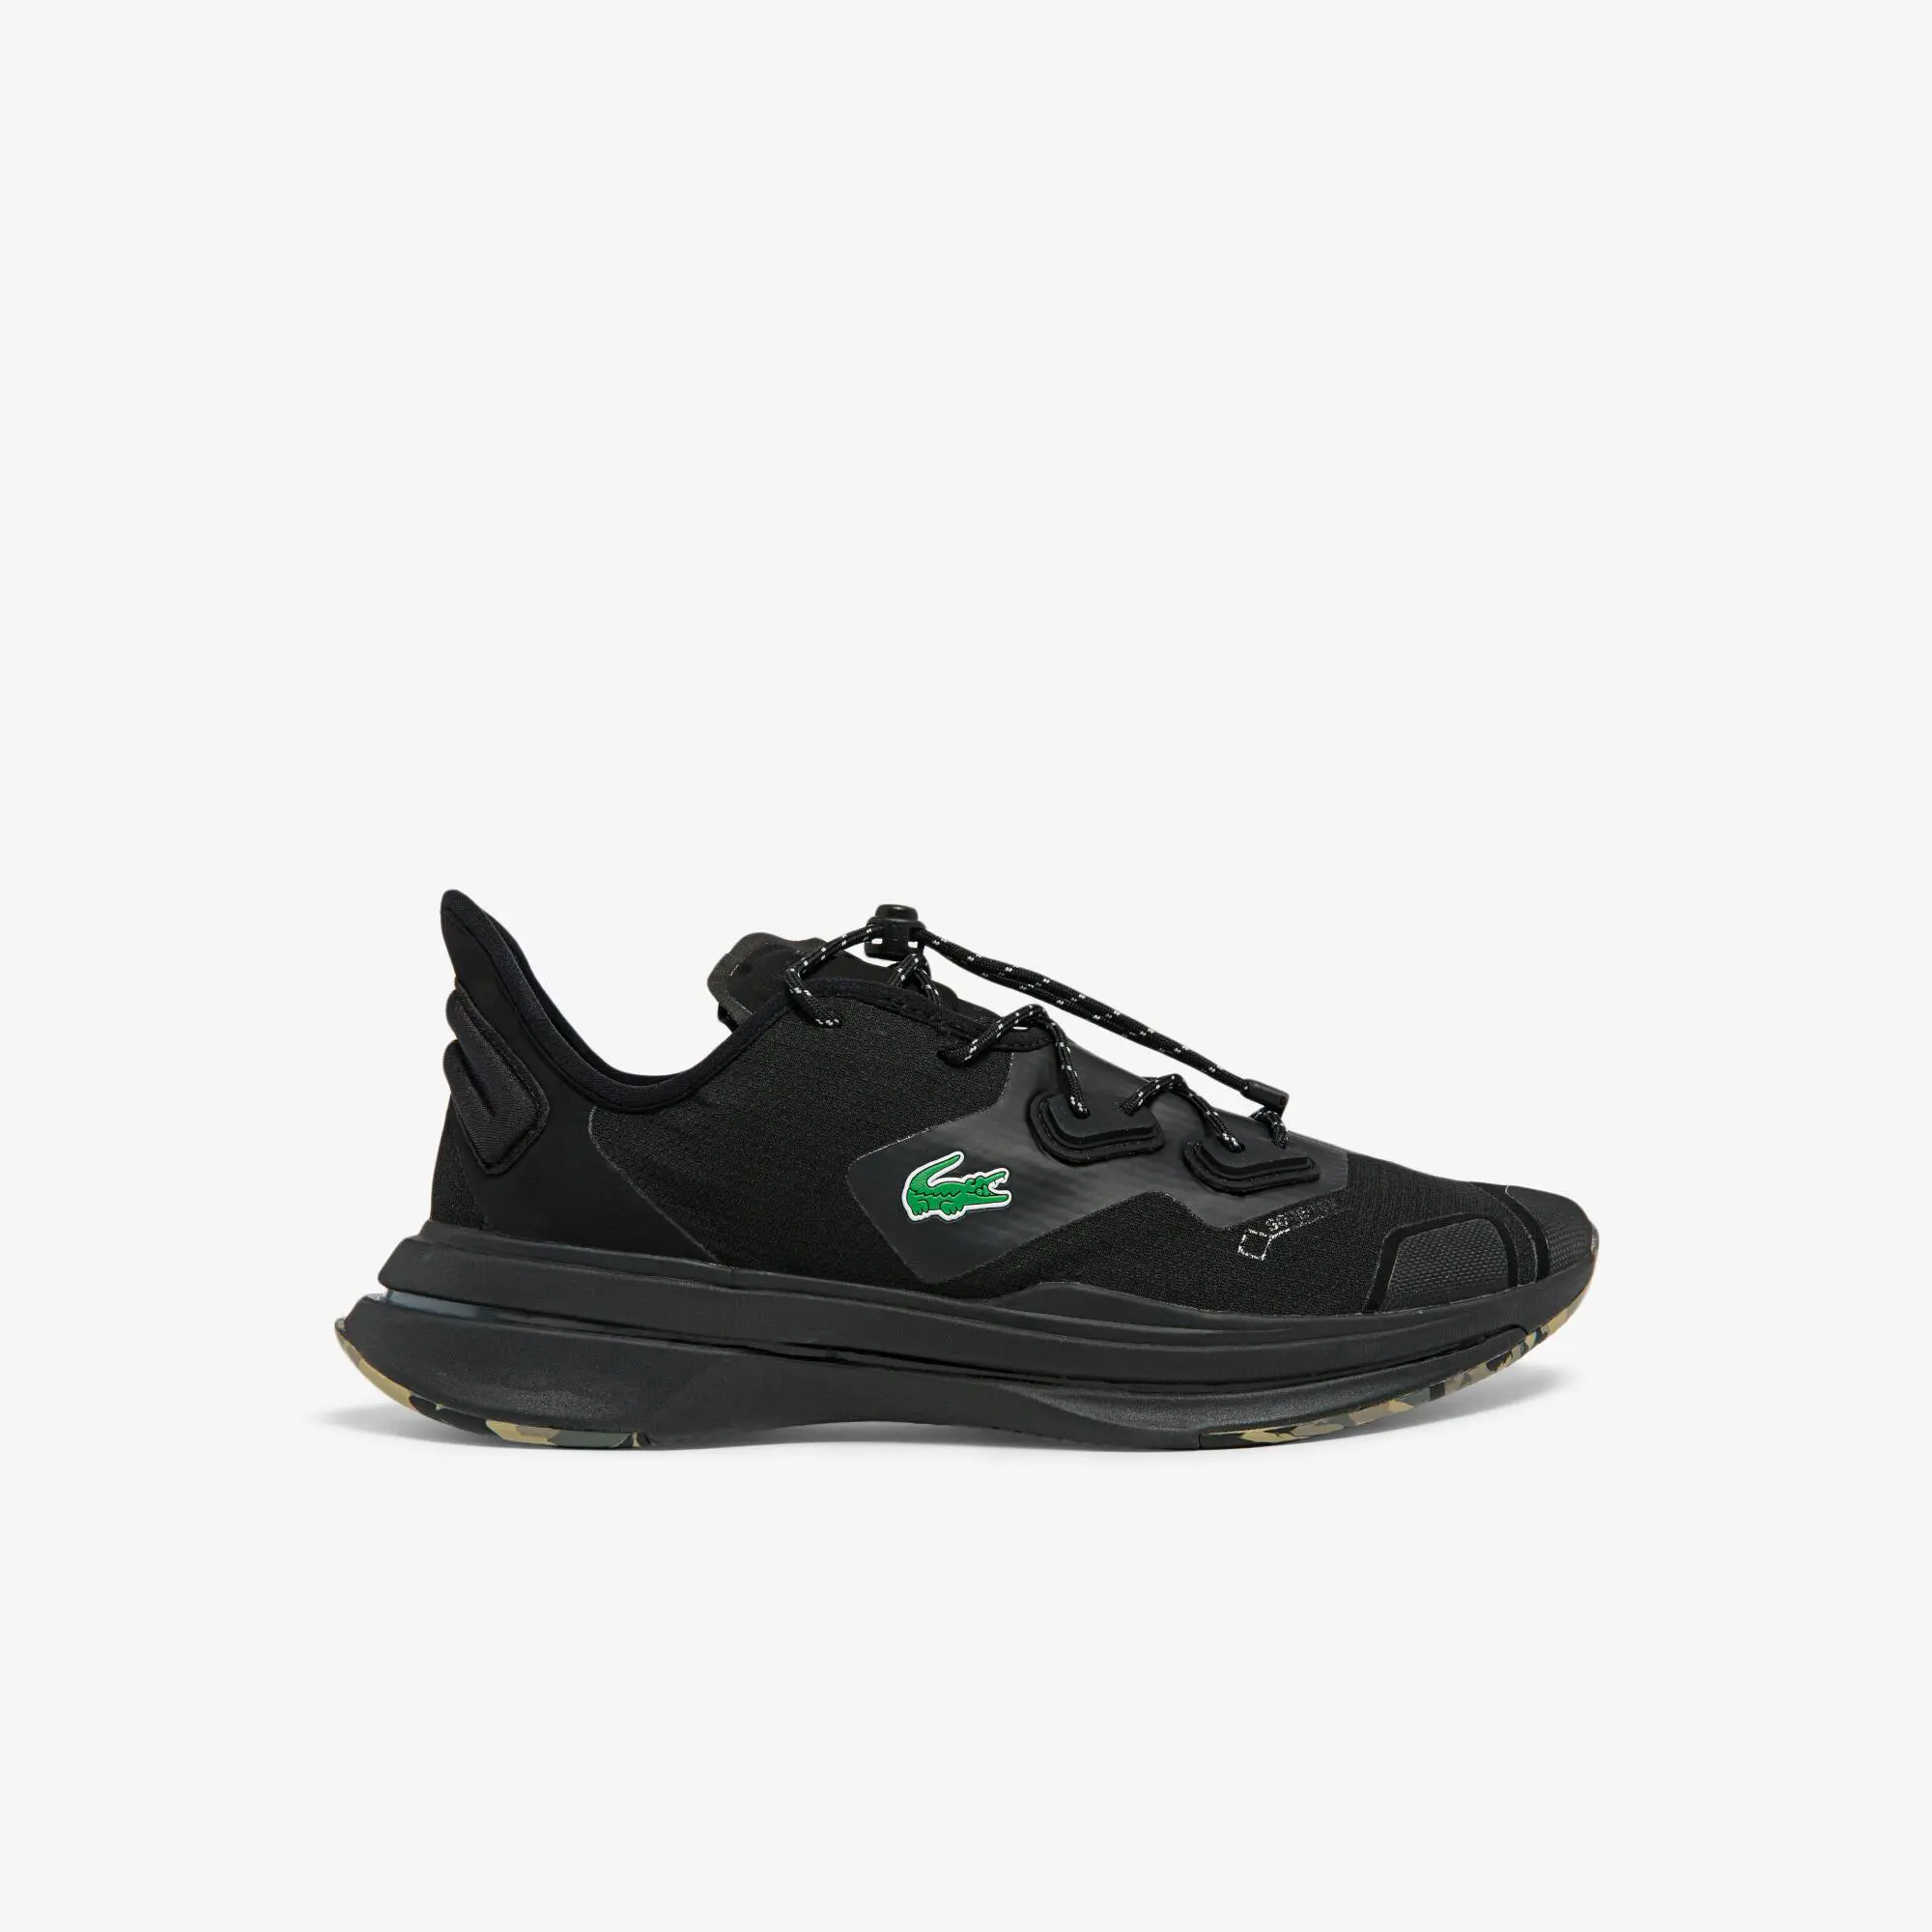 Lacoste Men's Run Spin Ultra GTX Textile Trainers. 1